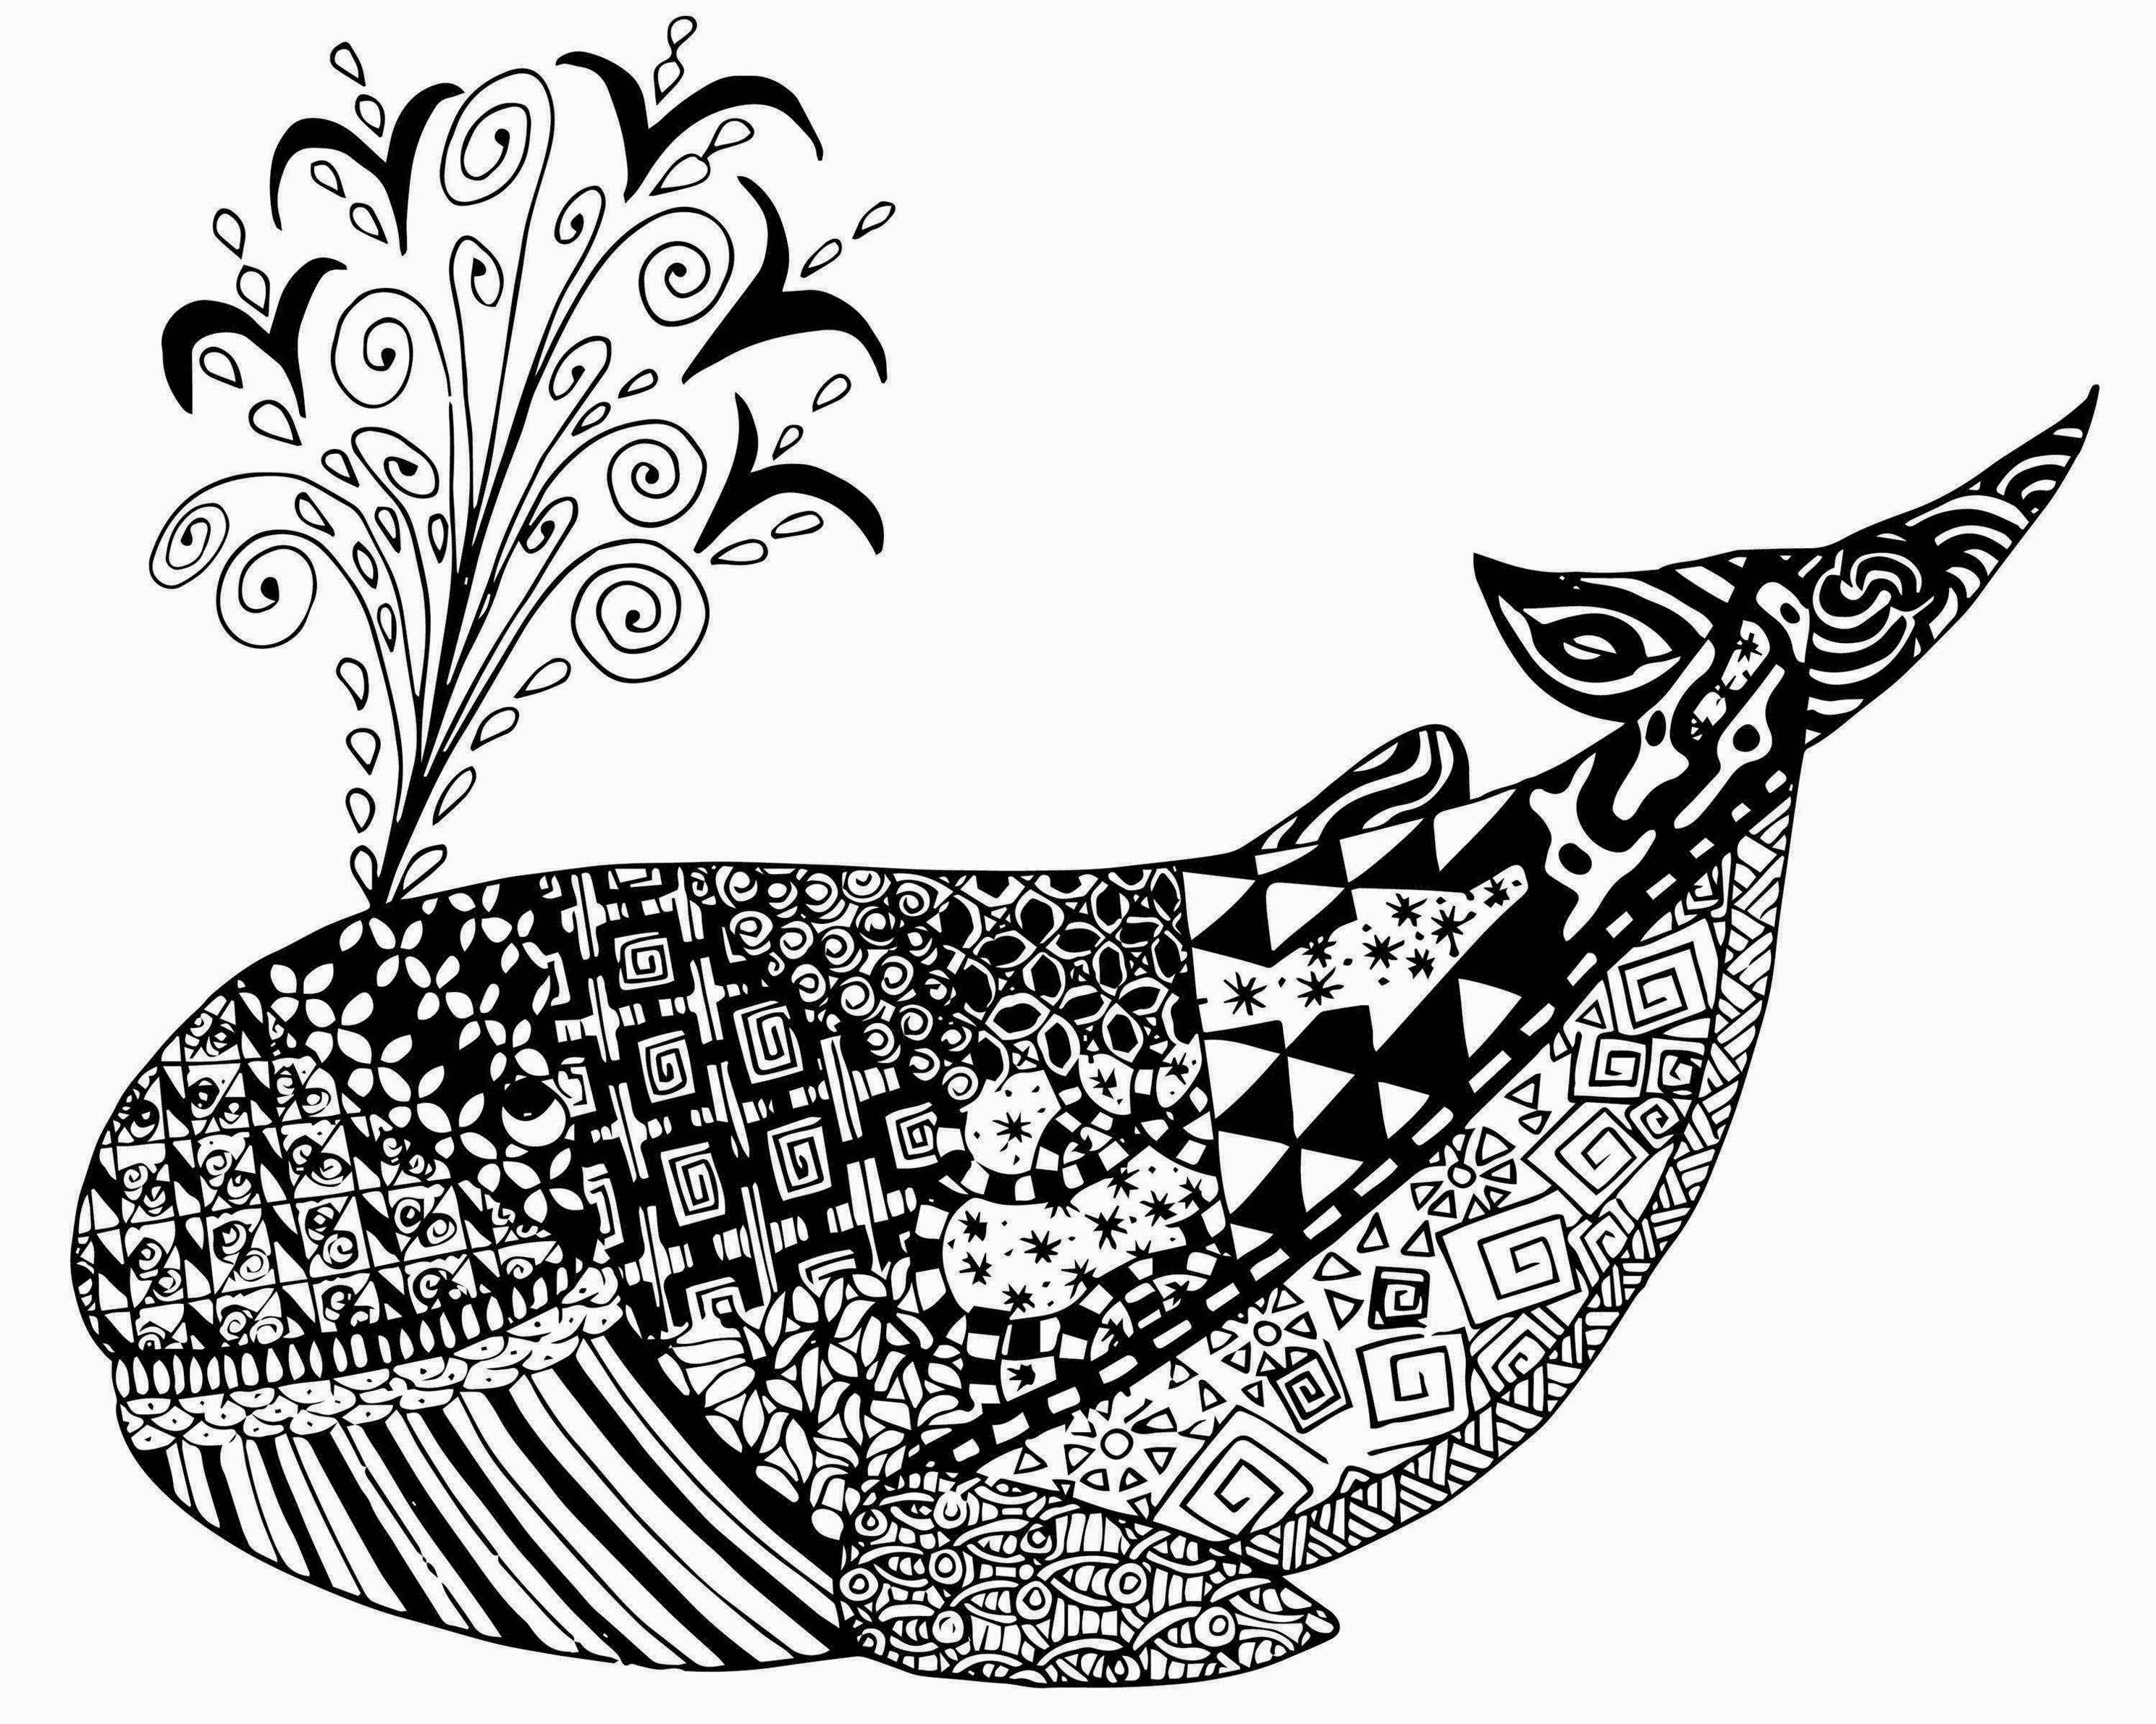 Sperm Whale Coloring Pages Free Printable - Free Coloring Pages Download - Free Printable Whale Coloring Pages